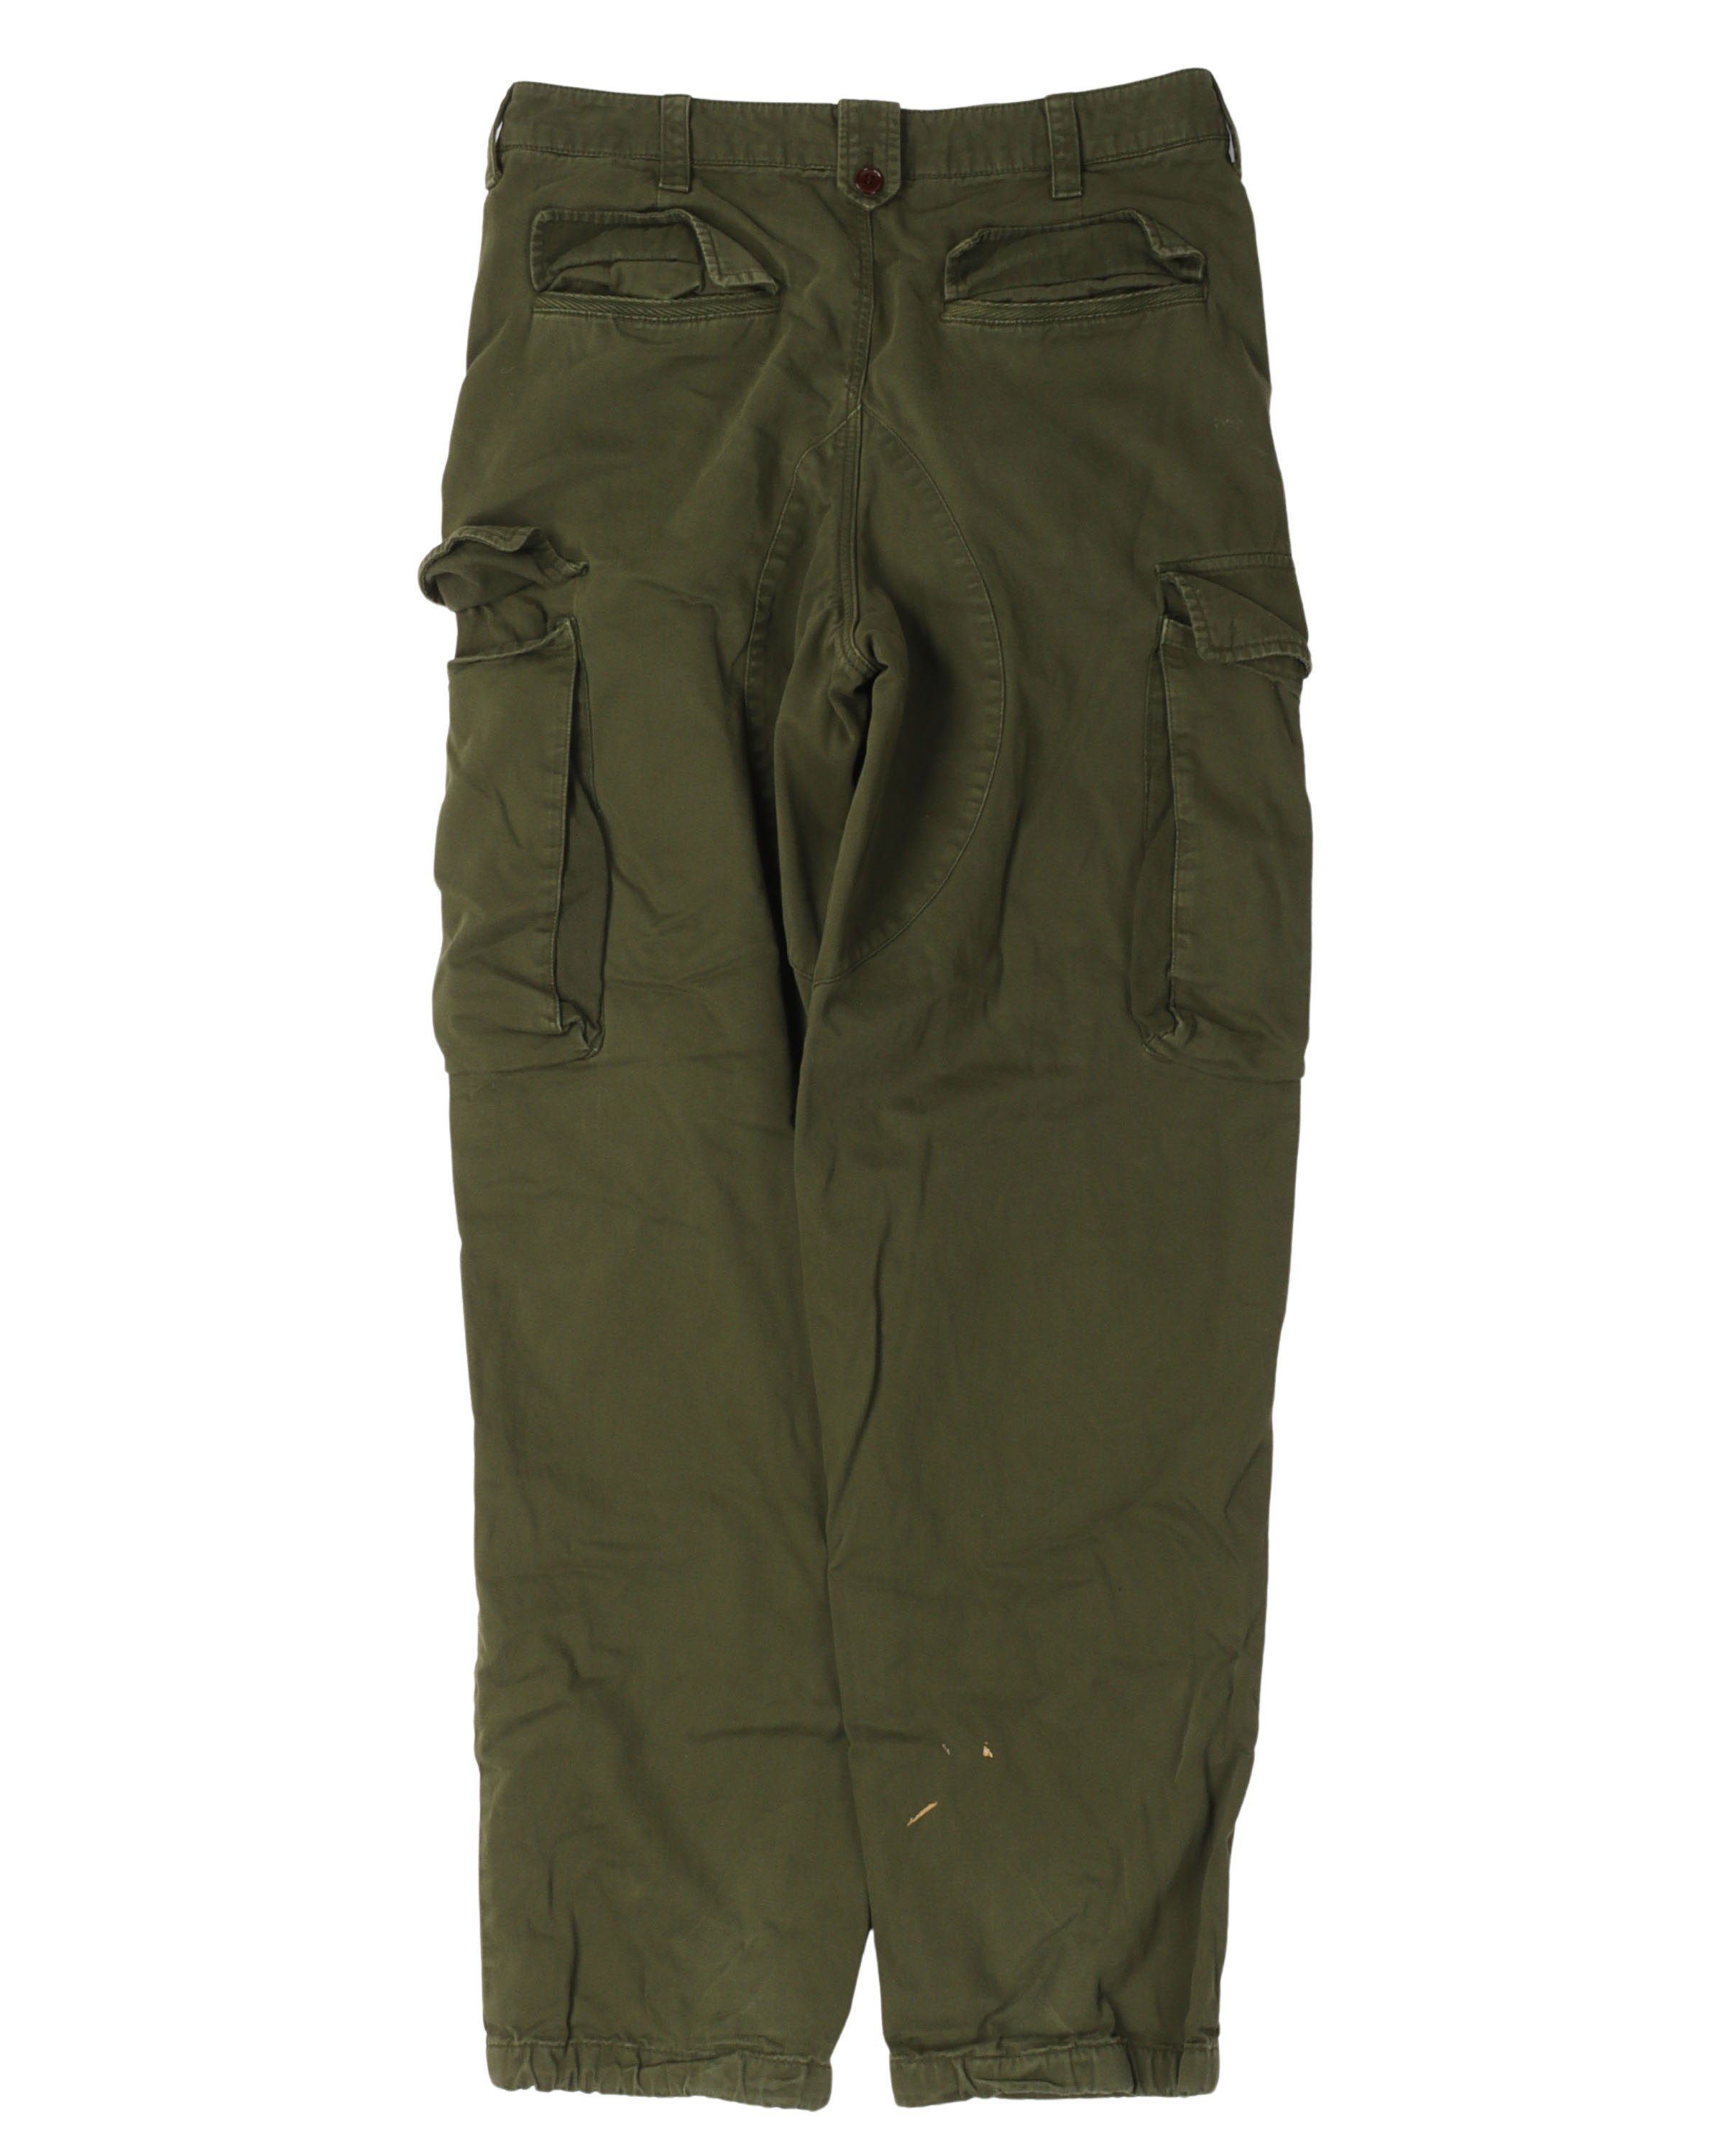 Painted Cargo Pants